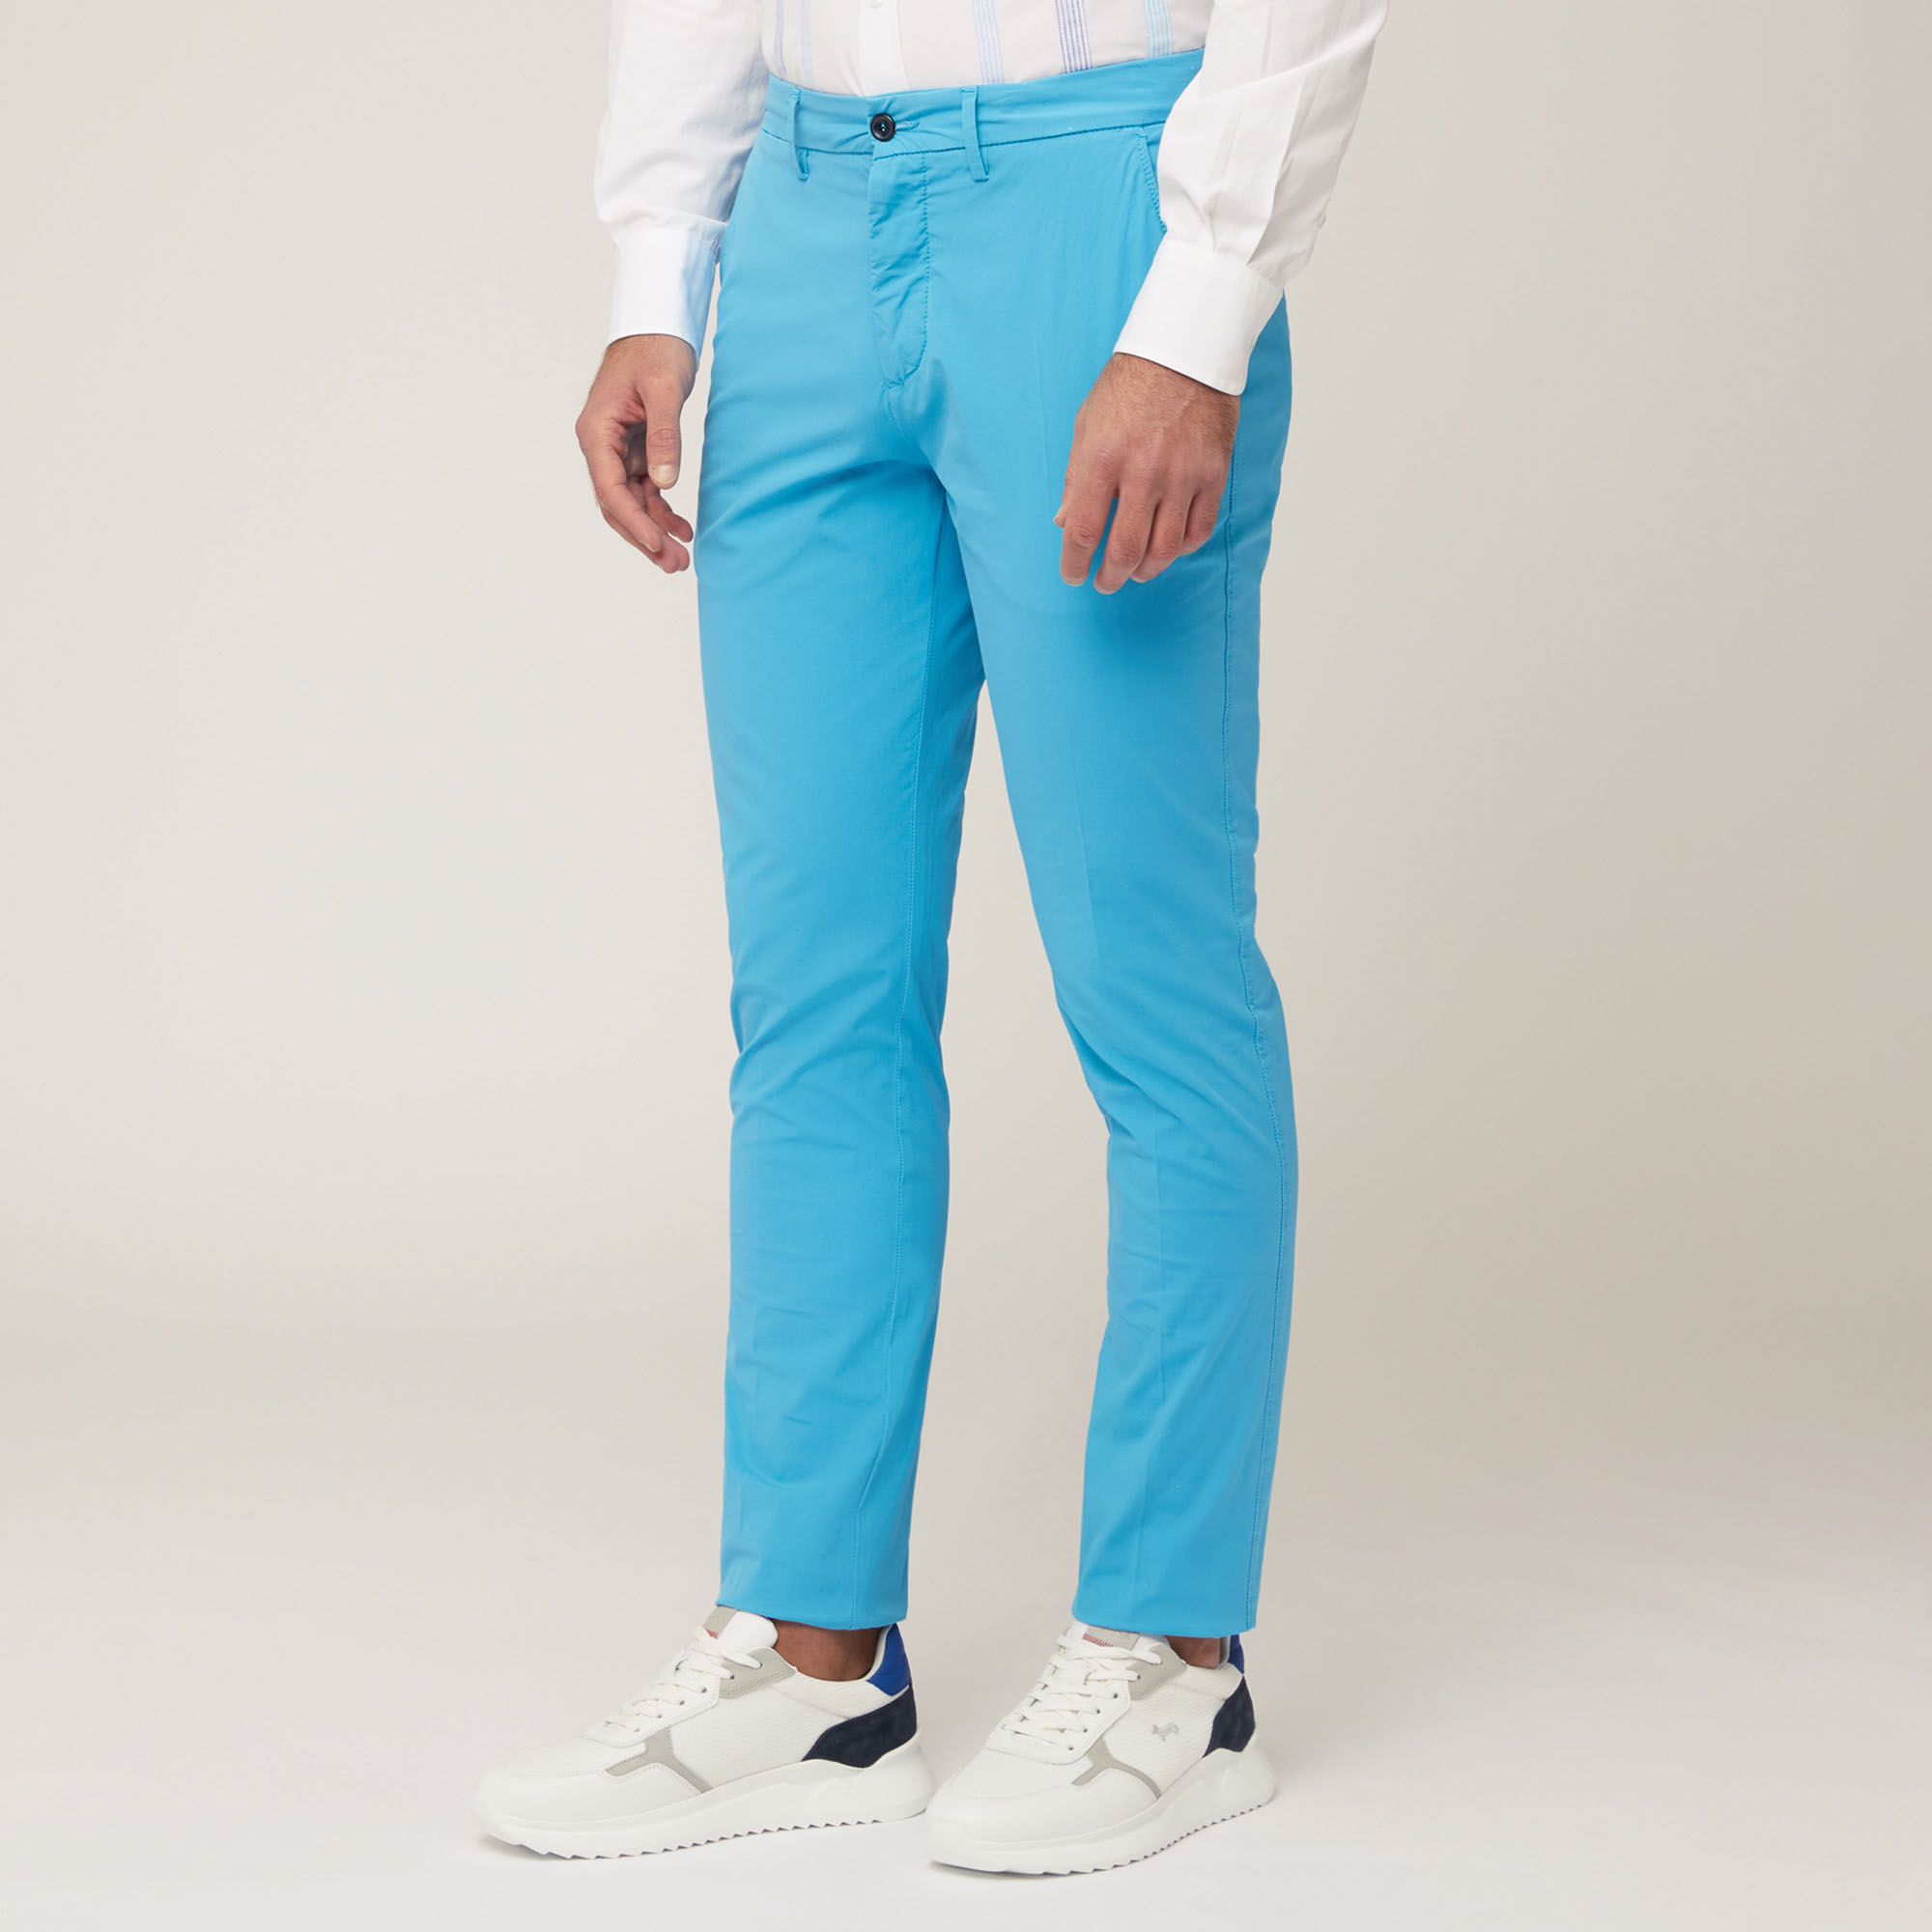 Narrow Fit Chino Pants, Light Blue, large image number 0